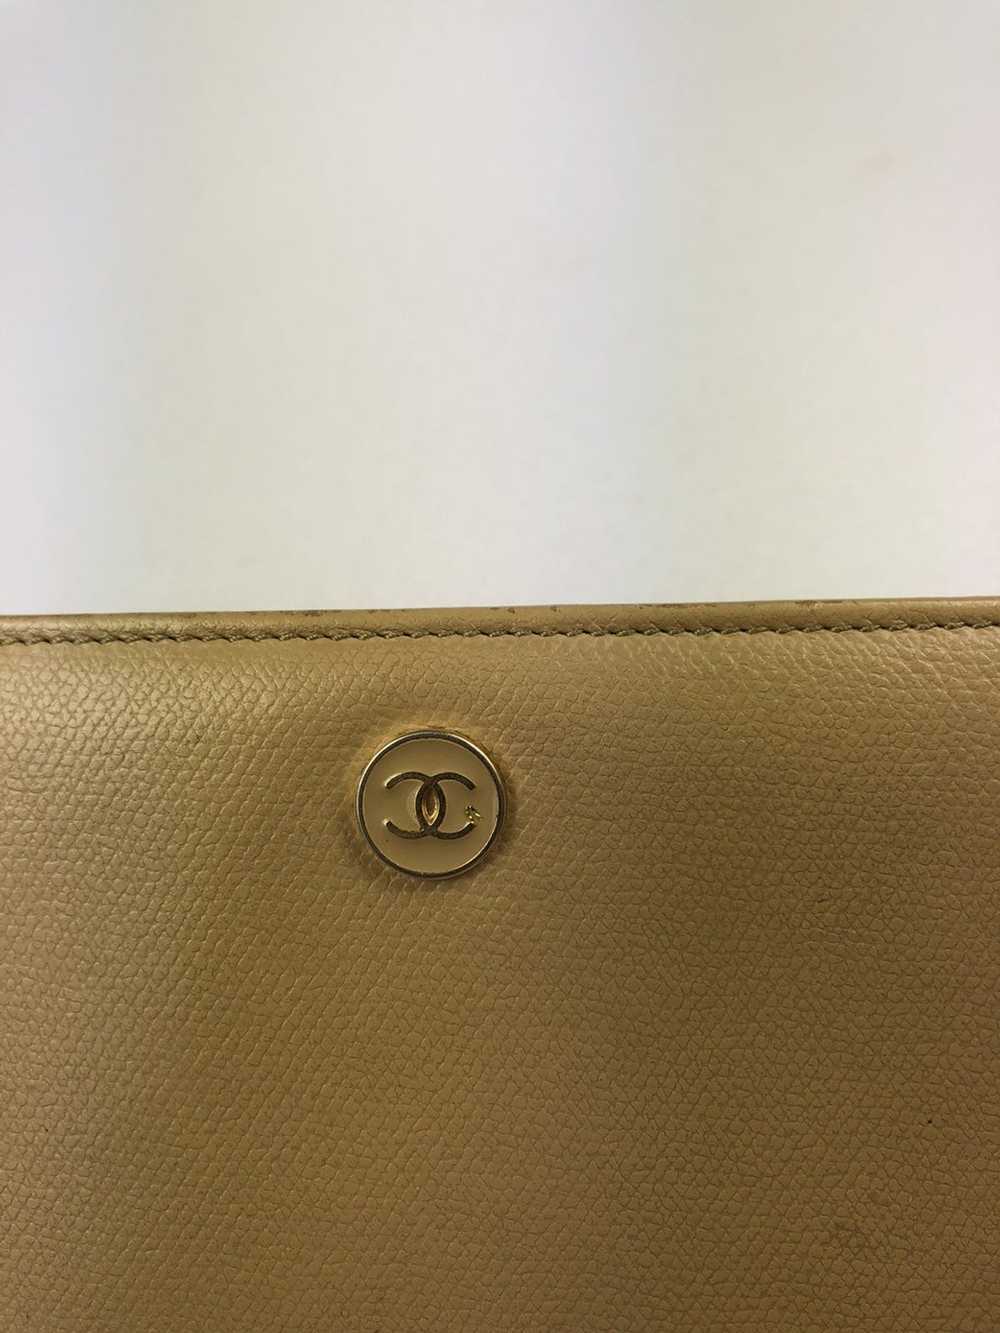 Chanel Chanel cc beige leather long wallet - image 2